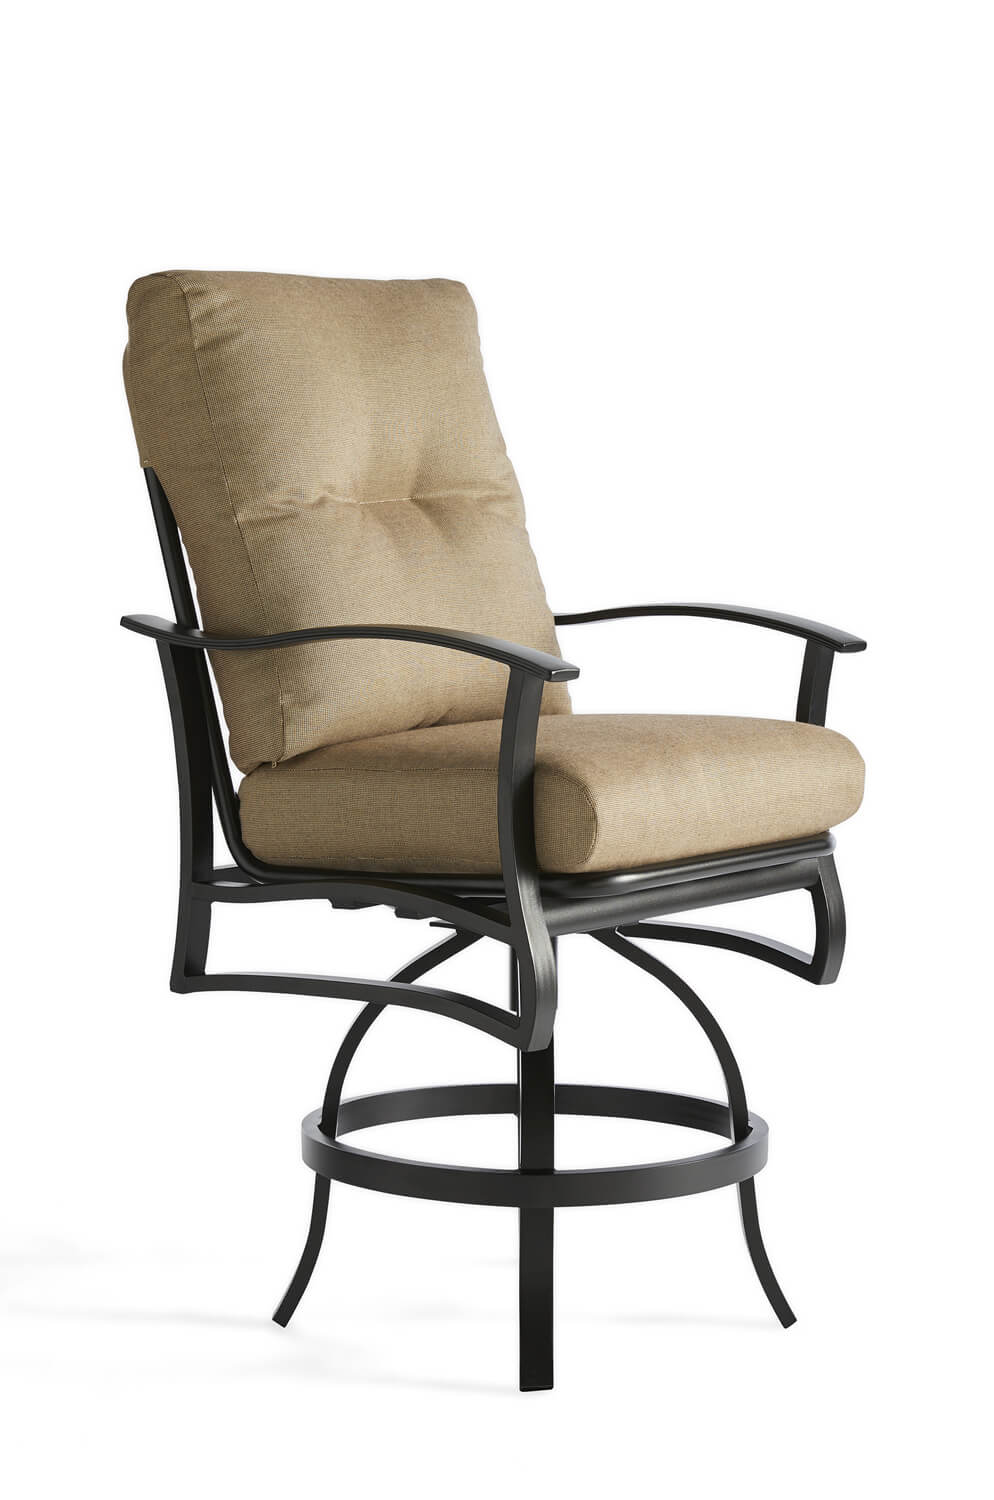 Mallin's Albany Swivel Counter Stool with Arms